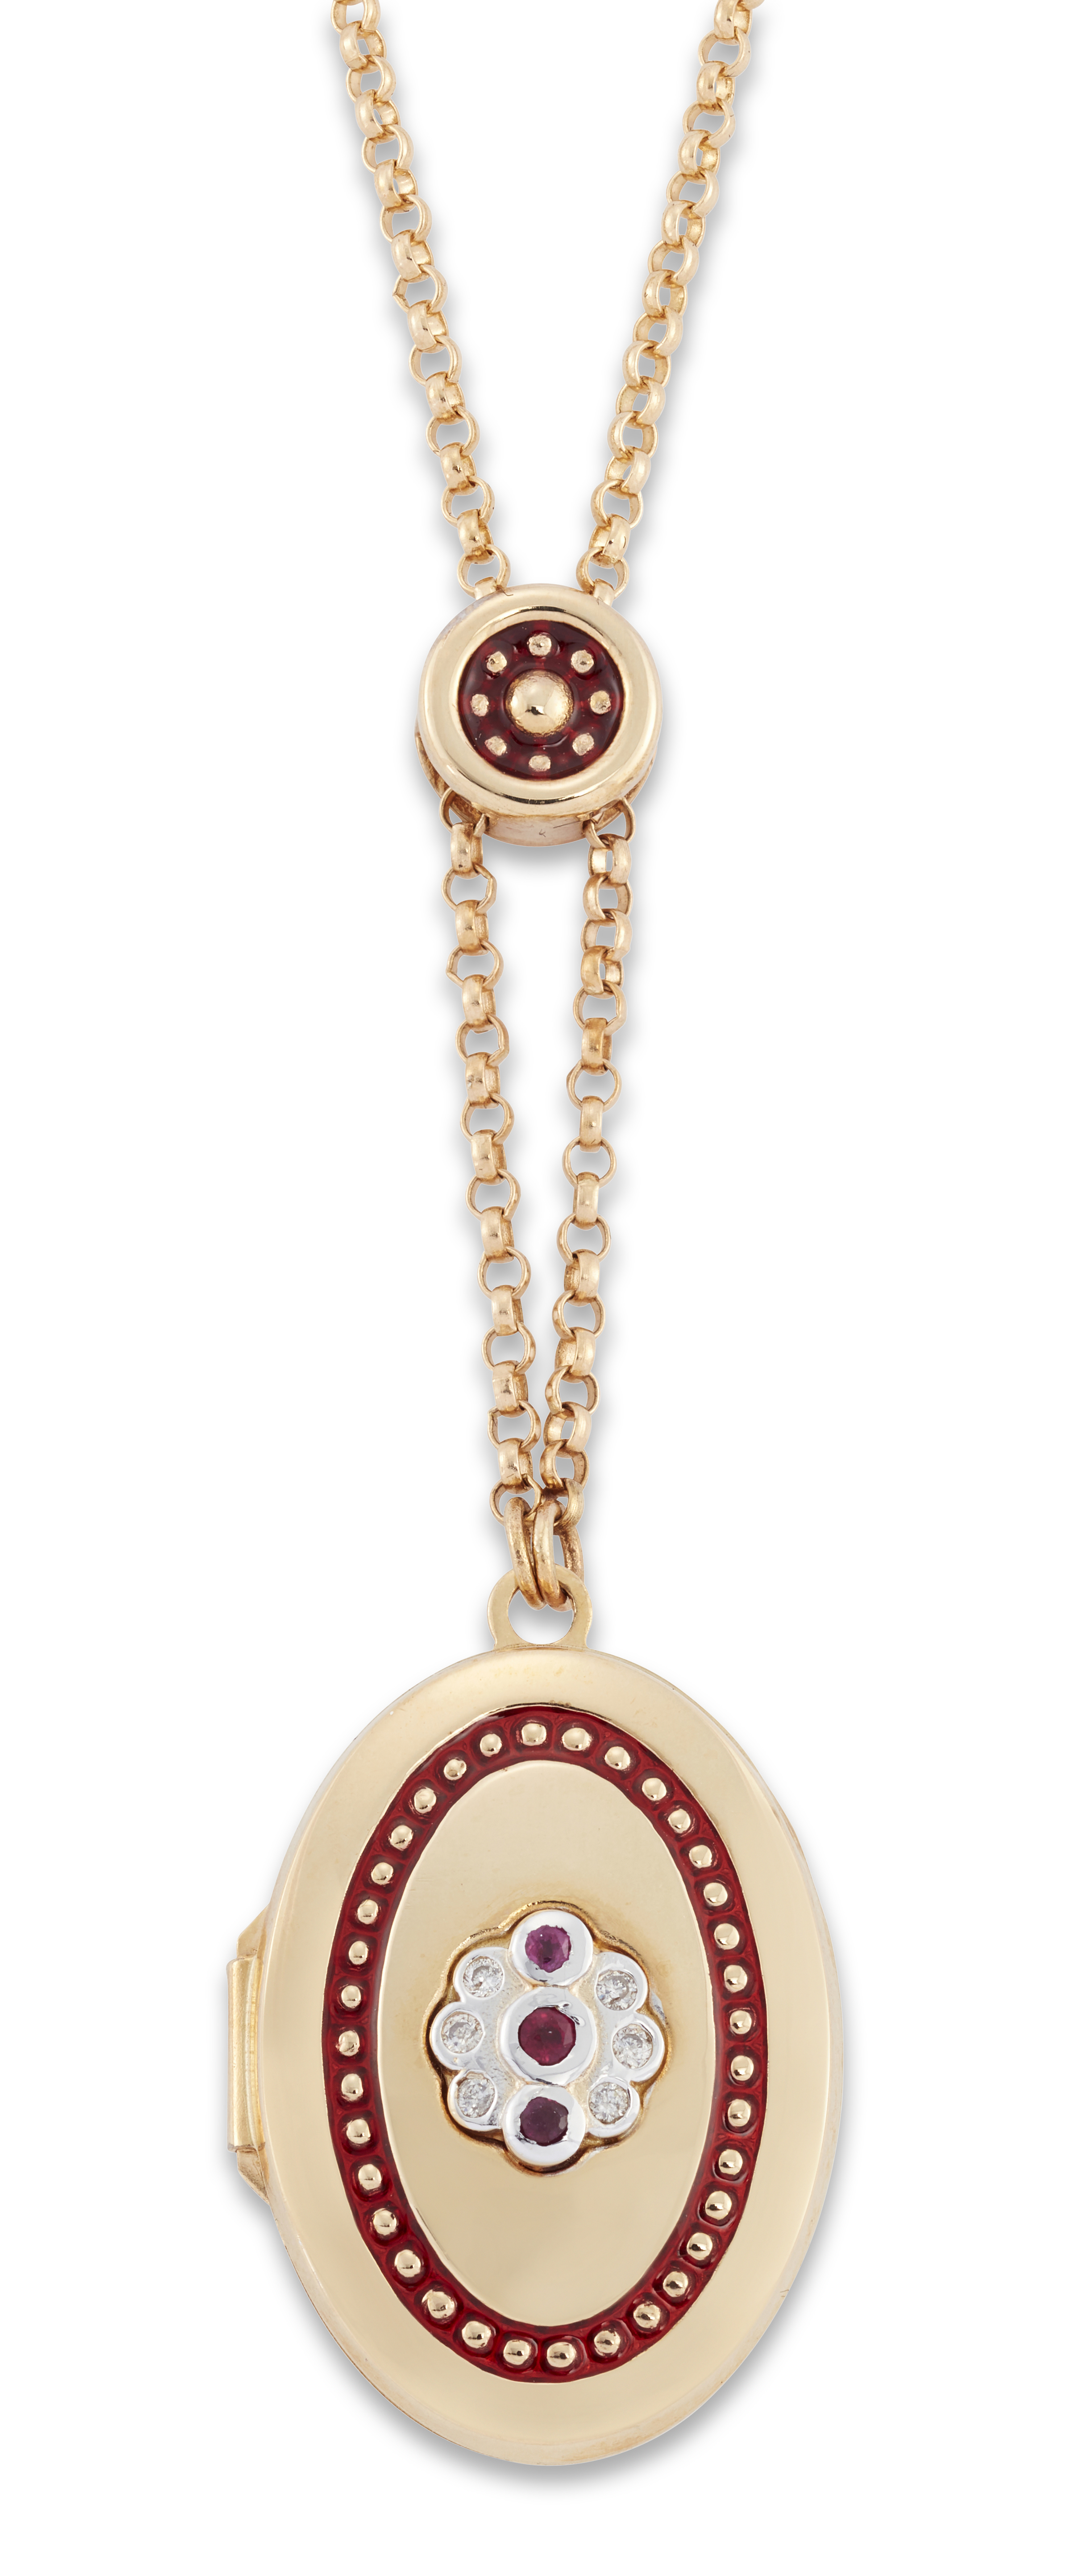 A 14ct gold ruby and diamond set locket, by Royal Doulton, limited edition 'Beatrice' pattern, su...